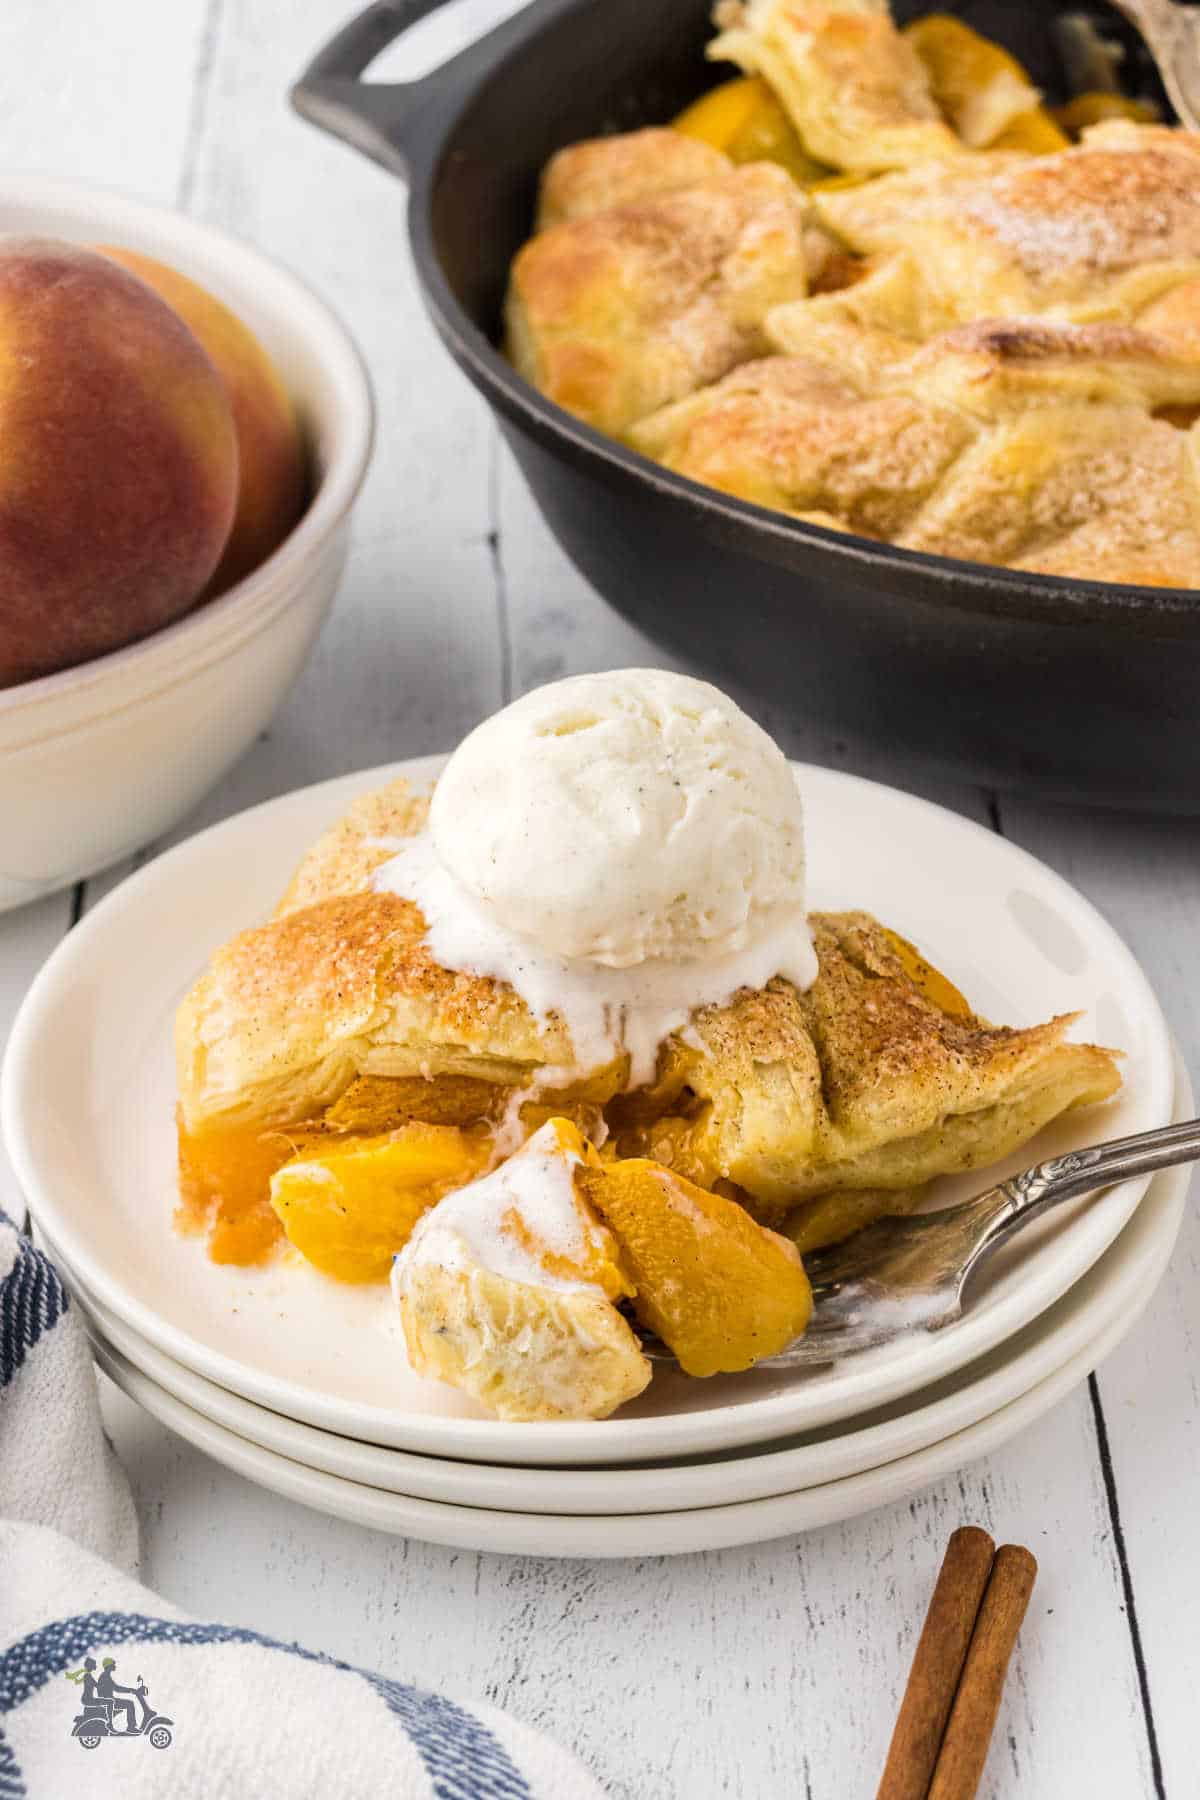 Peach Cobbler is made with canned peaches, a puff pastry top on a white plate, and a dessert topped with a scoop of vanilla ice cream. 